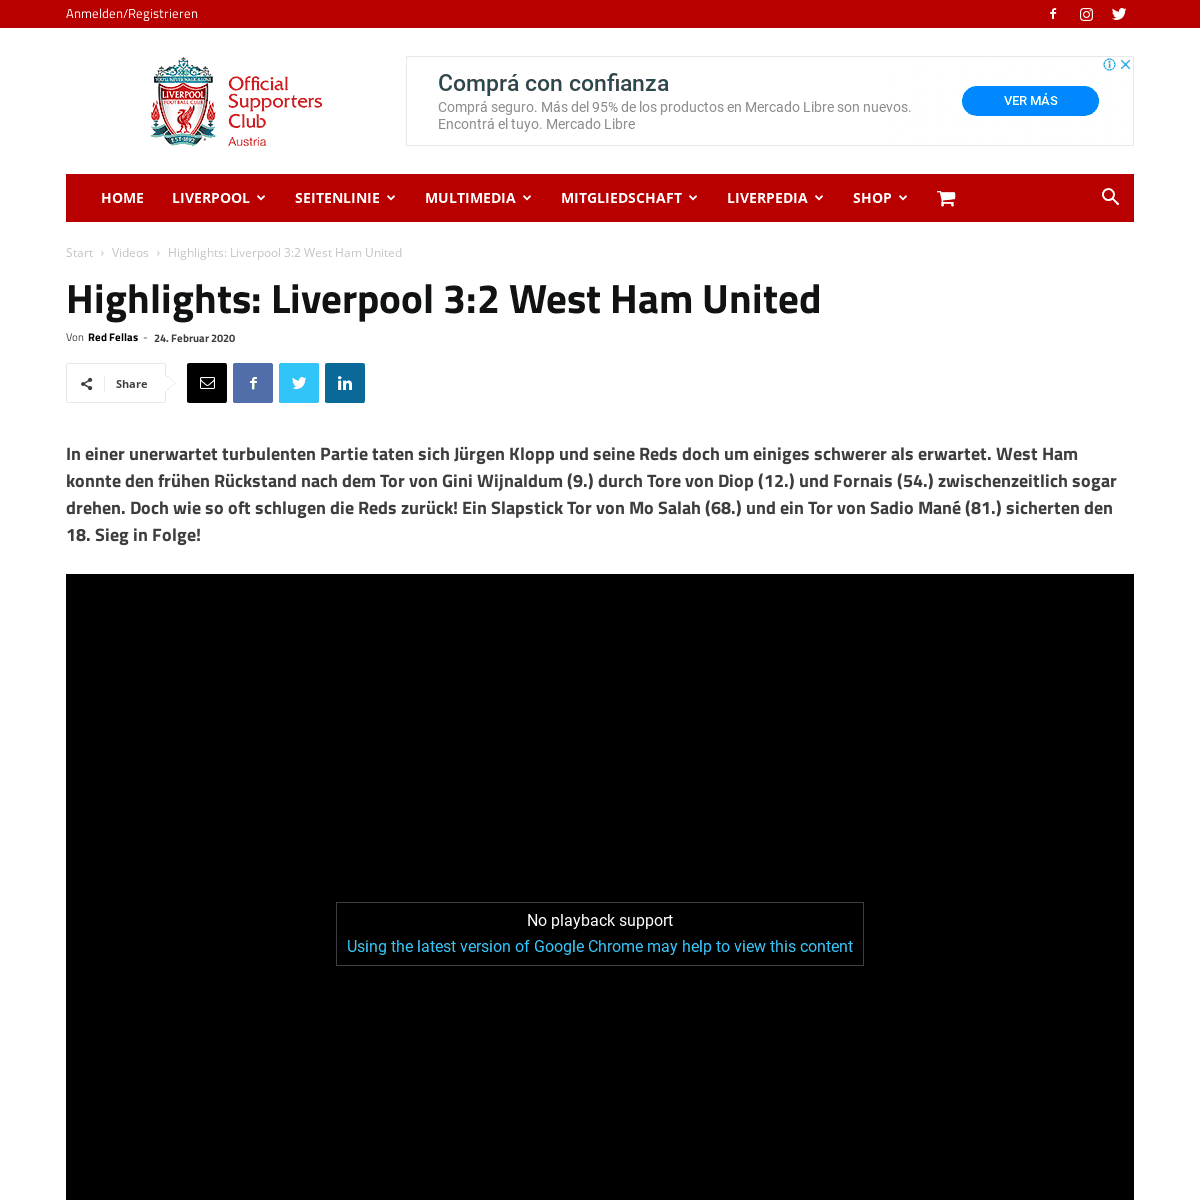 A complete backup of www.redfellas.org/2020/02/24/highlights-liverpool-32-west-ham-united/